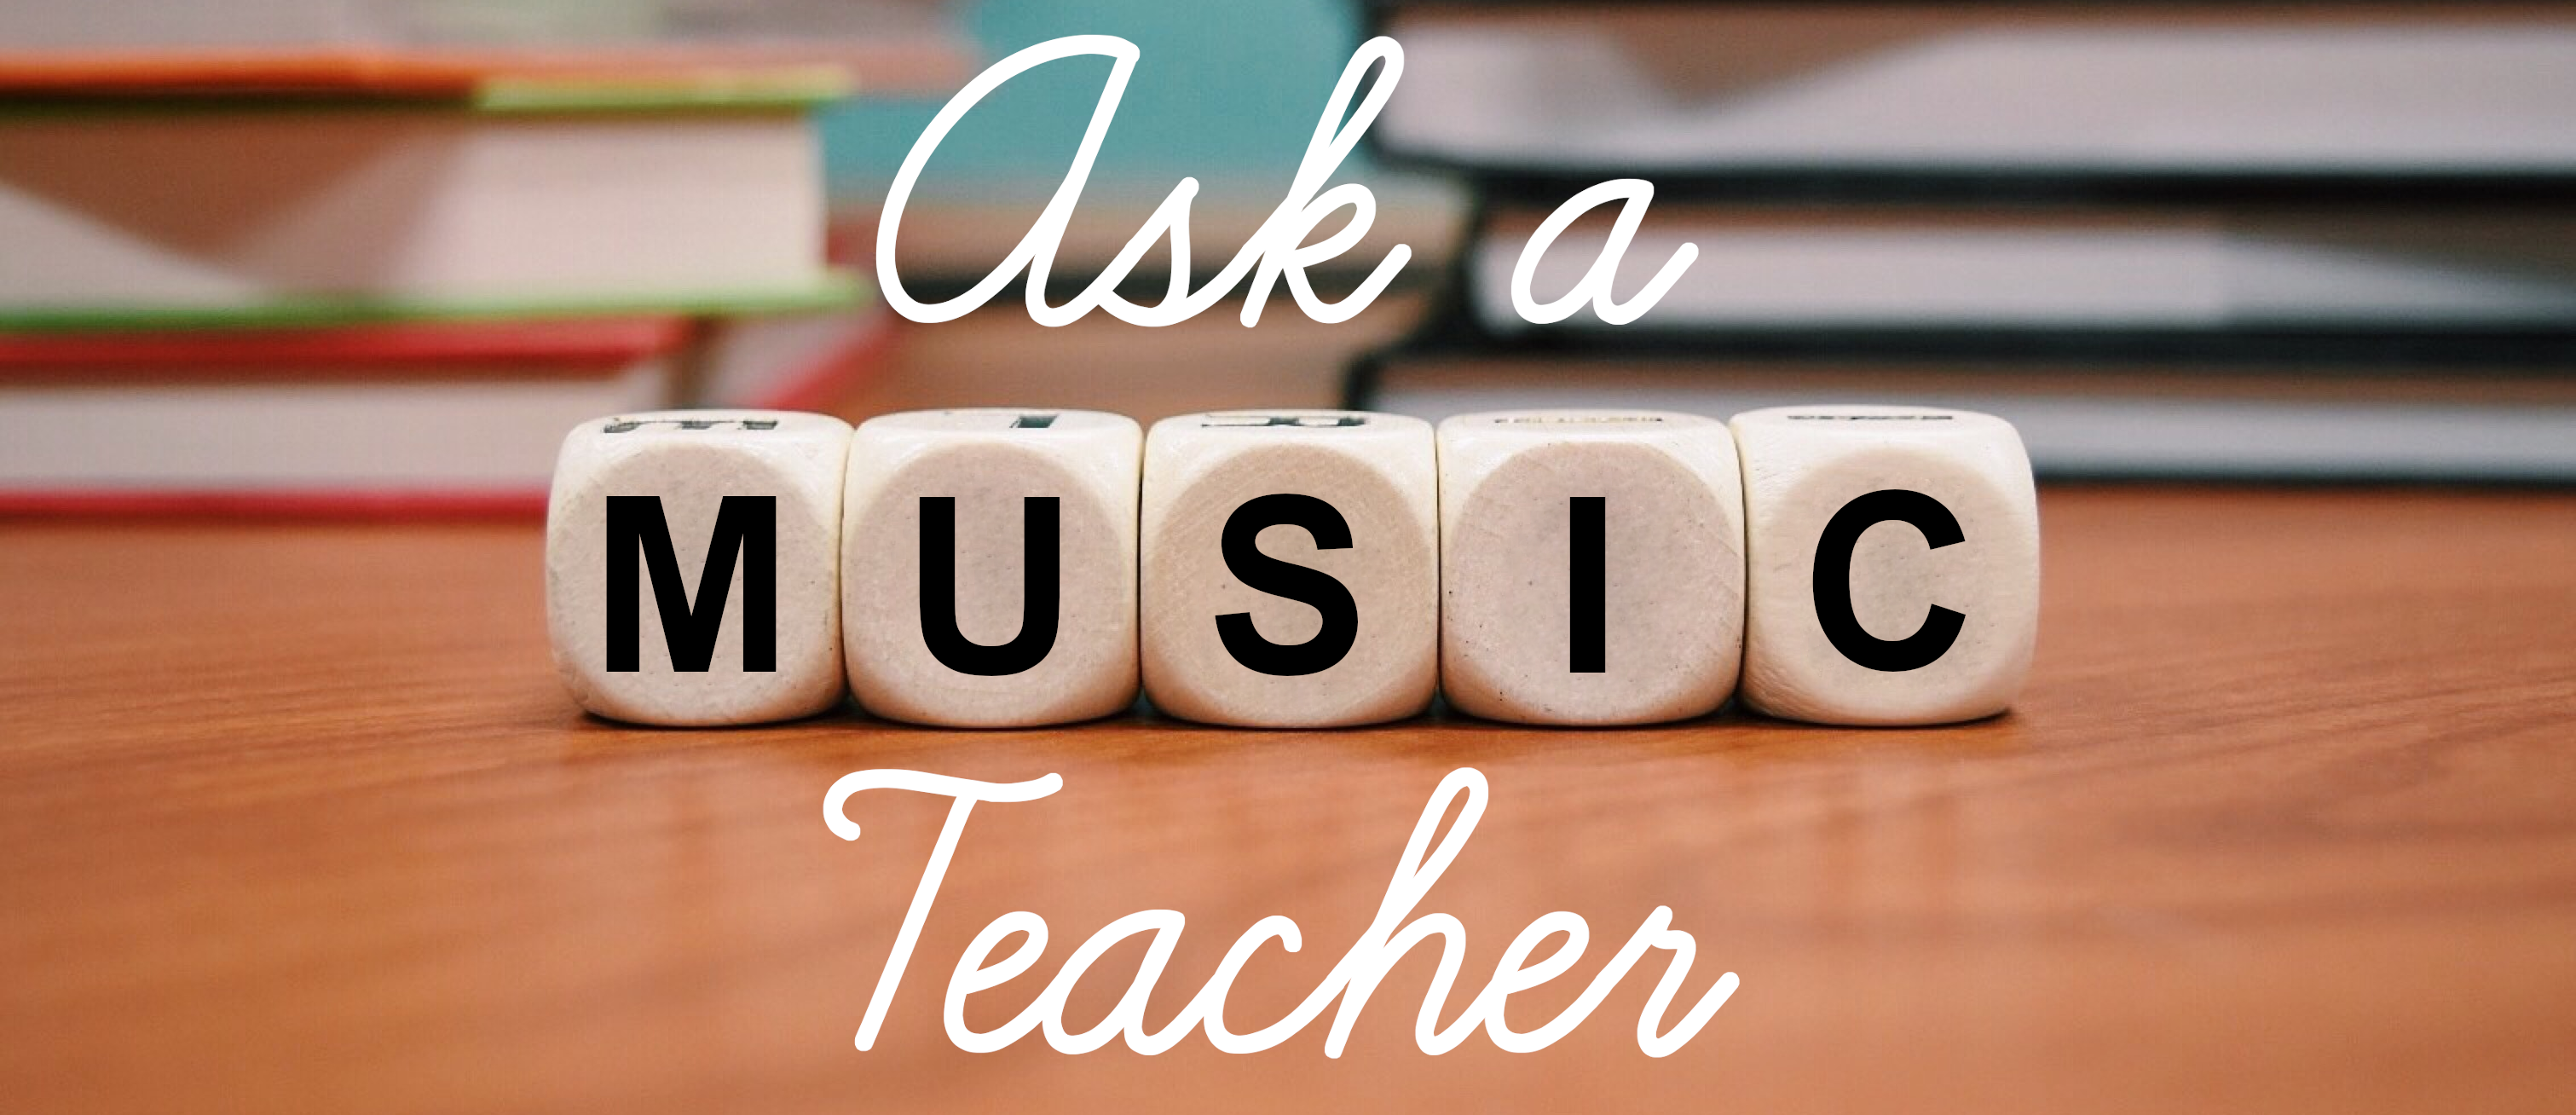 Ask a Music Teacher: What do I need to start music lessons?